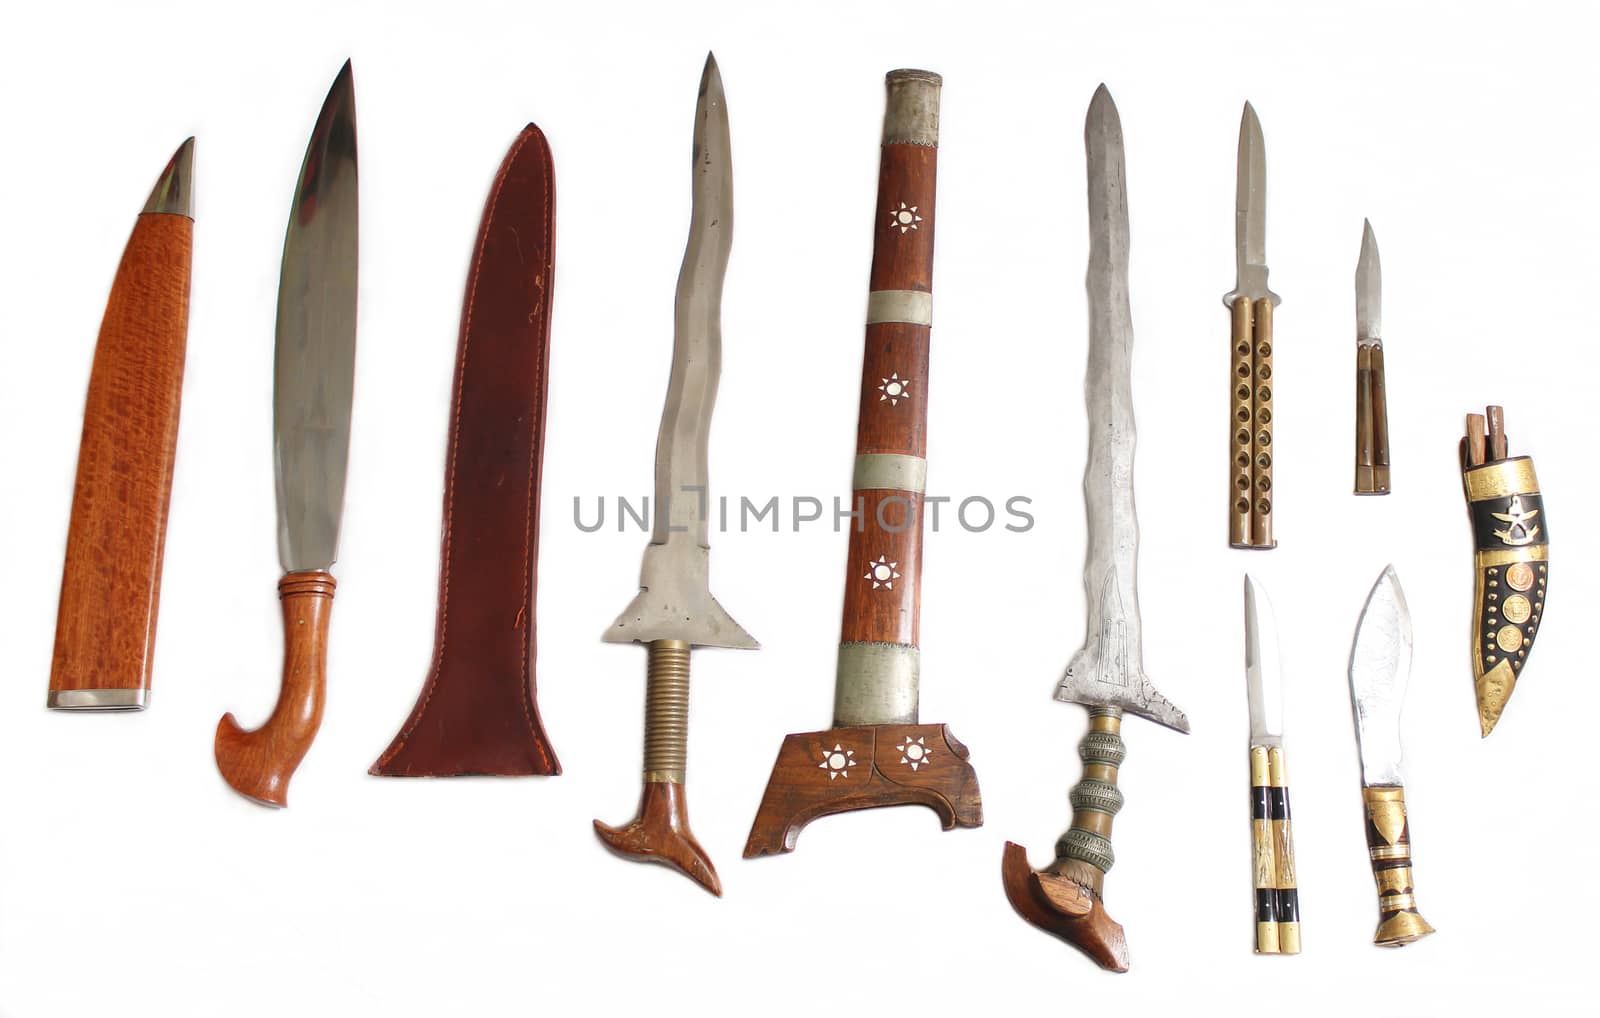 Filipino Fighting Sword and Knife Collection on White by Marti157900